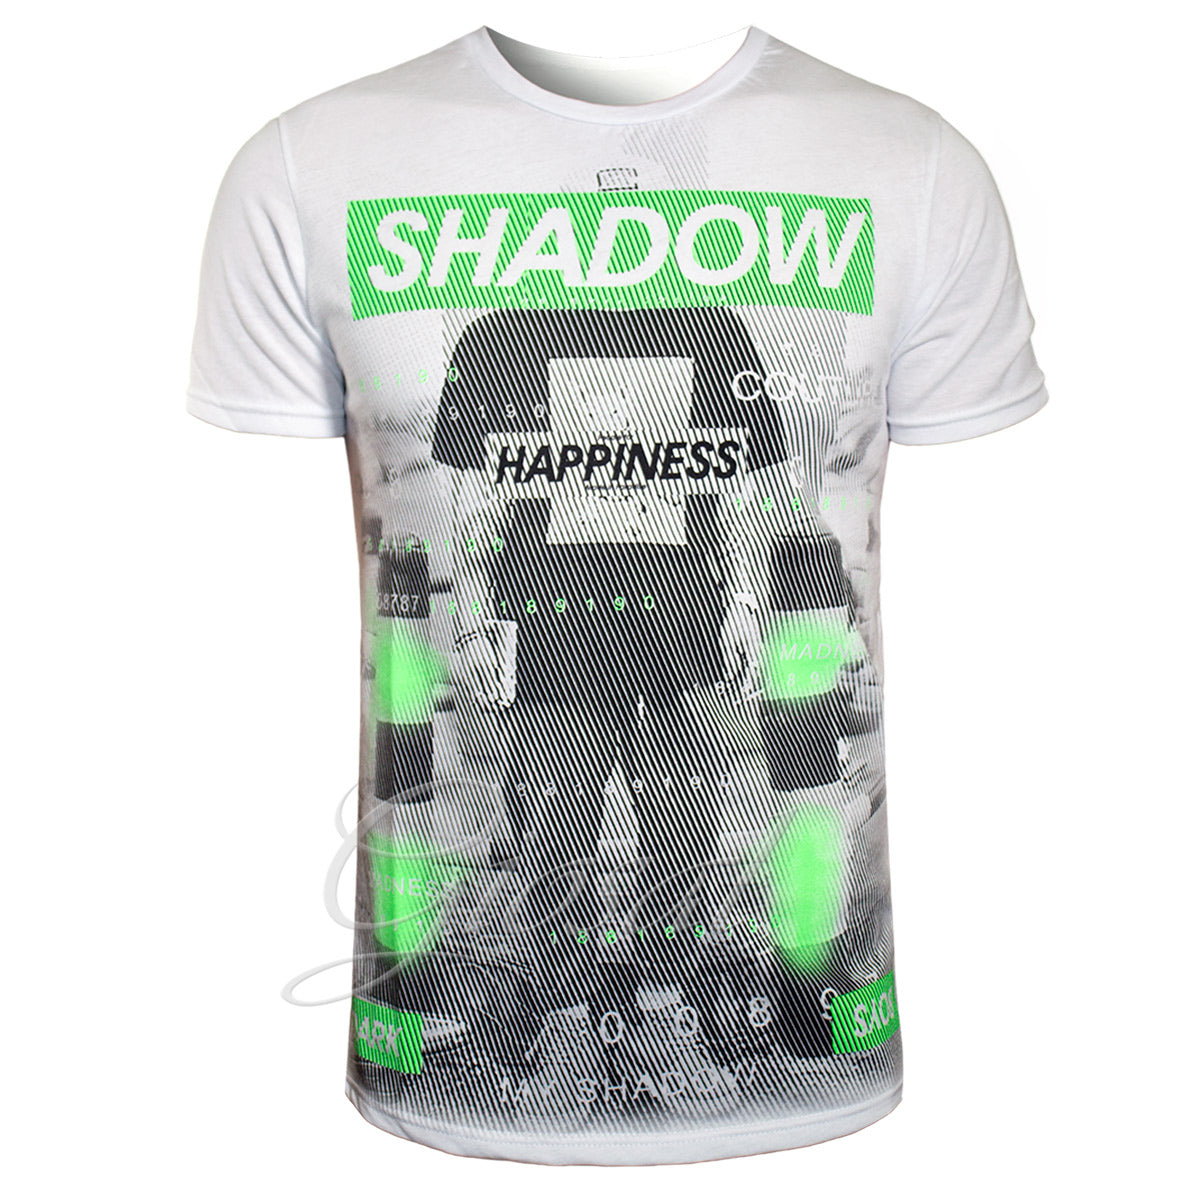 Happiness Men's T-Shirt Two Colors Written Print Crew Neck Casual GIOSAL